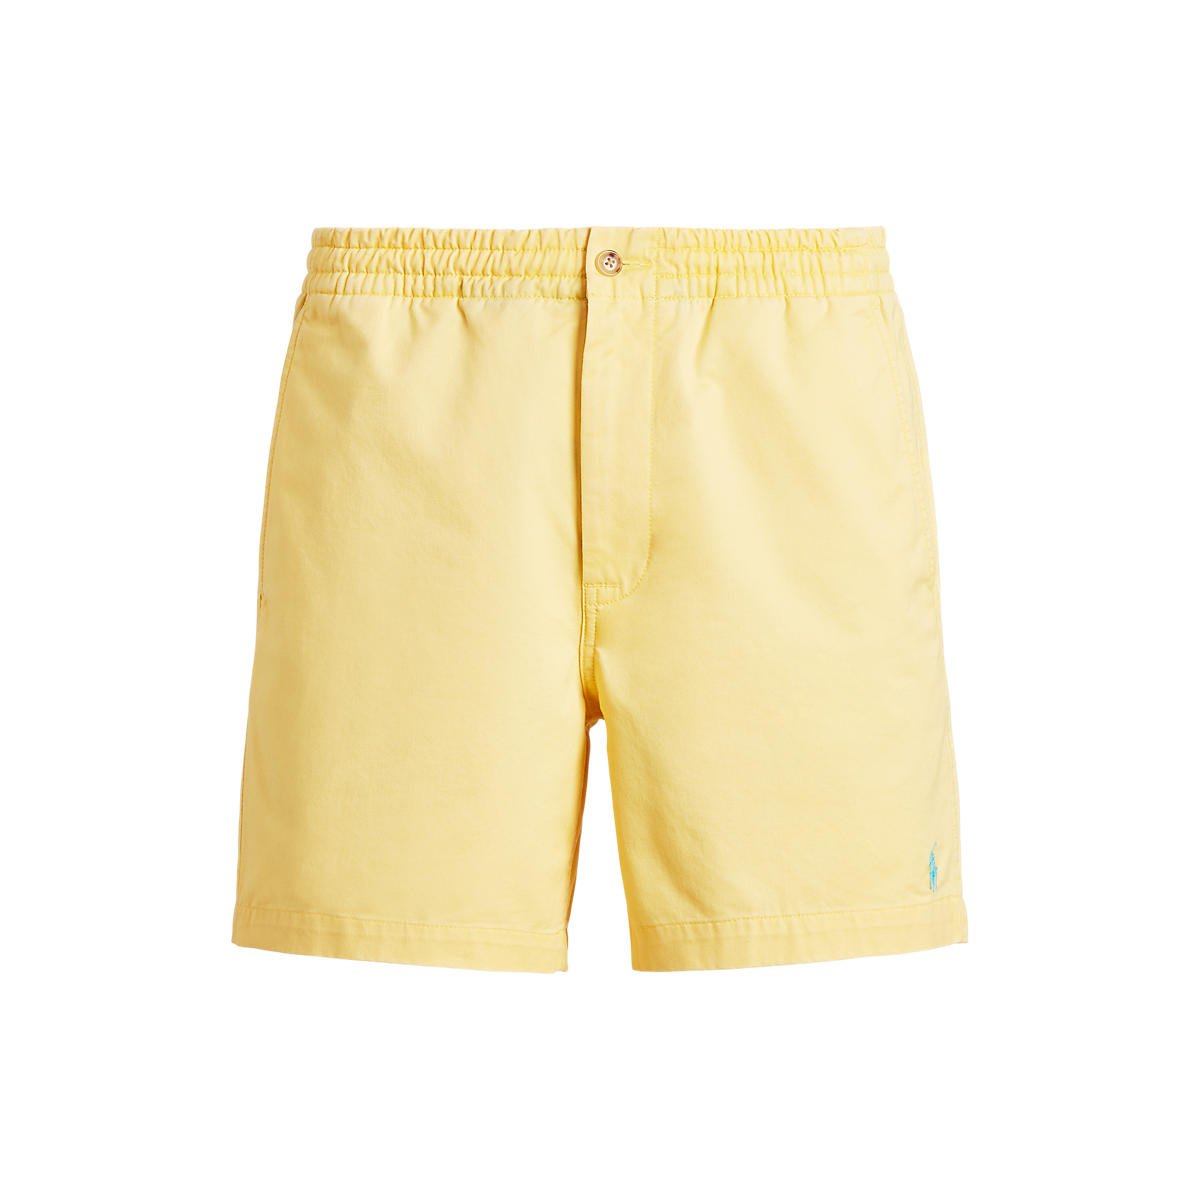 710644995047 Polo Ralph Lauren 6-Inch Polo Prepster Stretch Chino Short Yellow P3,605 from P5,150.jpeg